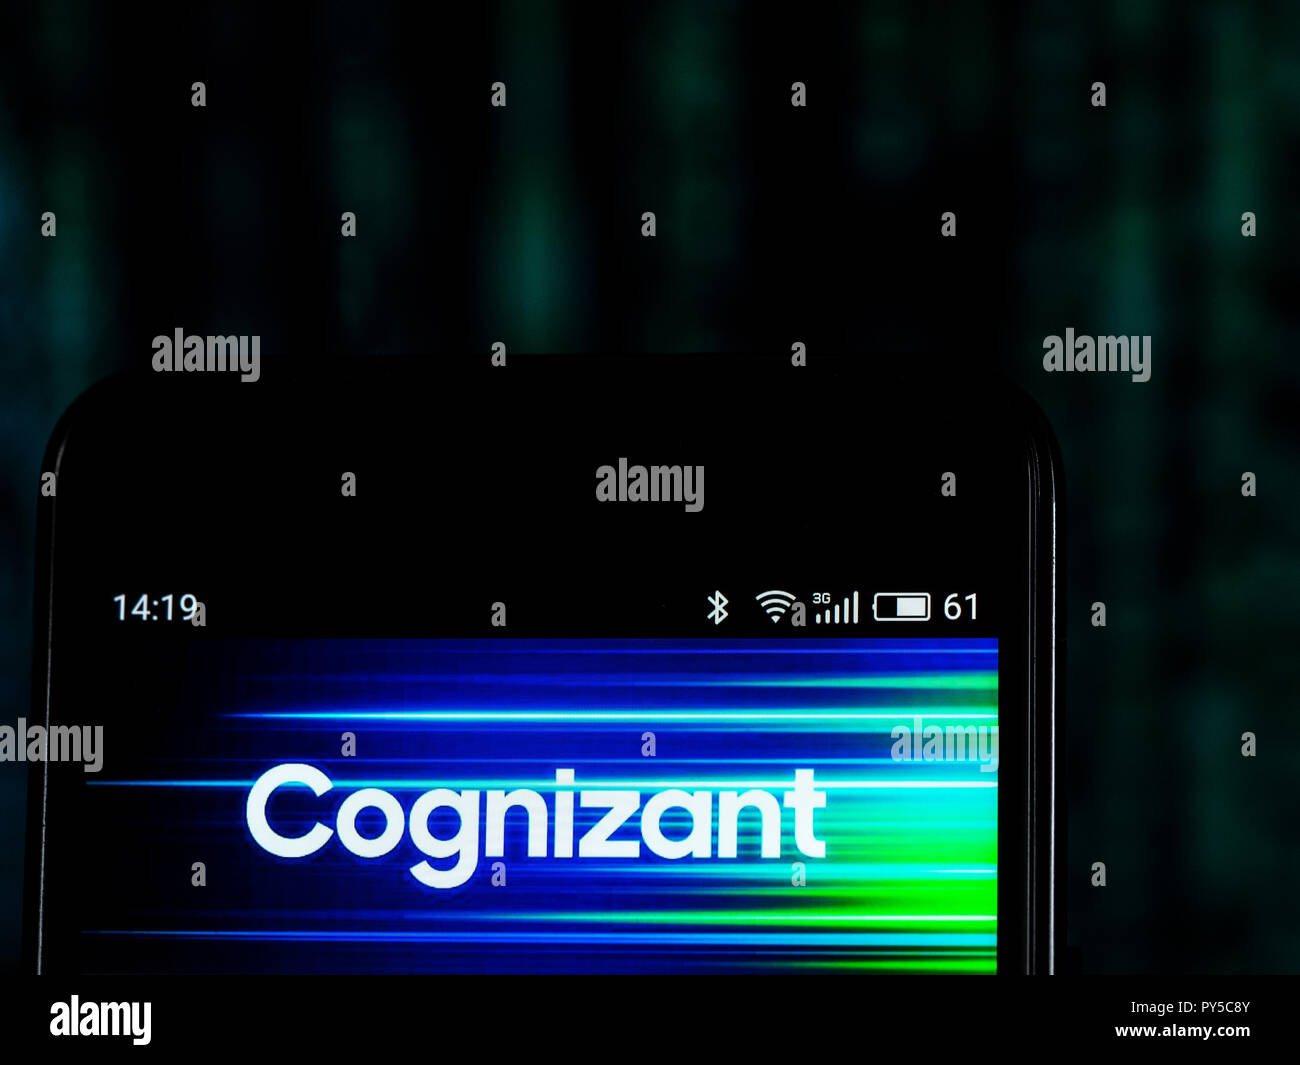 Cognizant Corporation logo seen displayed on smart phone. Cognizant is a multinational corporation that provides IT services, including digital, technology, consulting, and operations services. Stock Photo